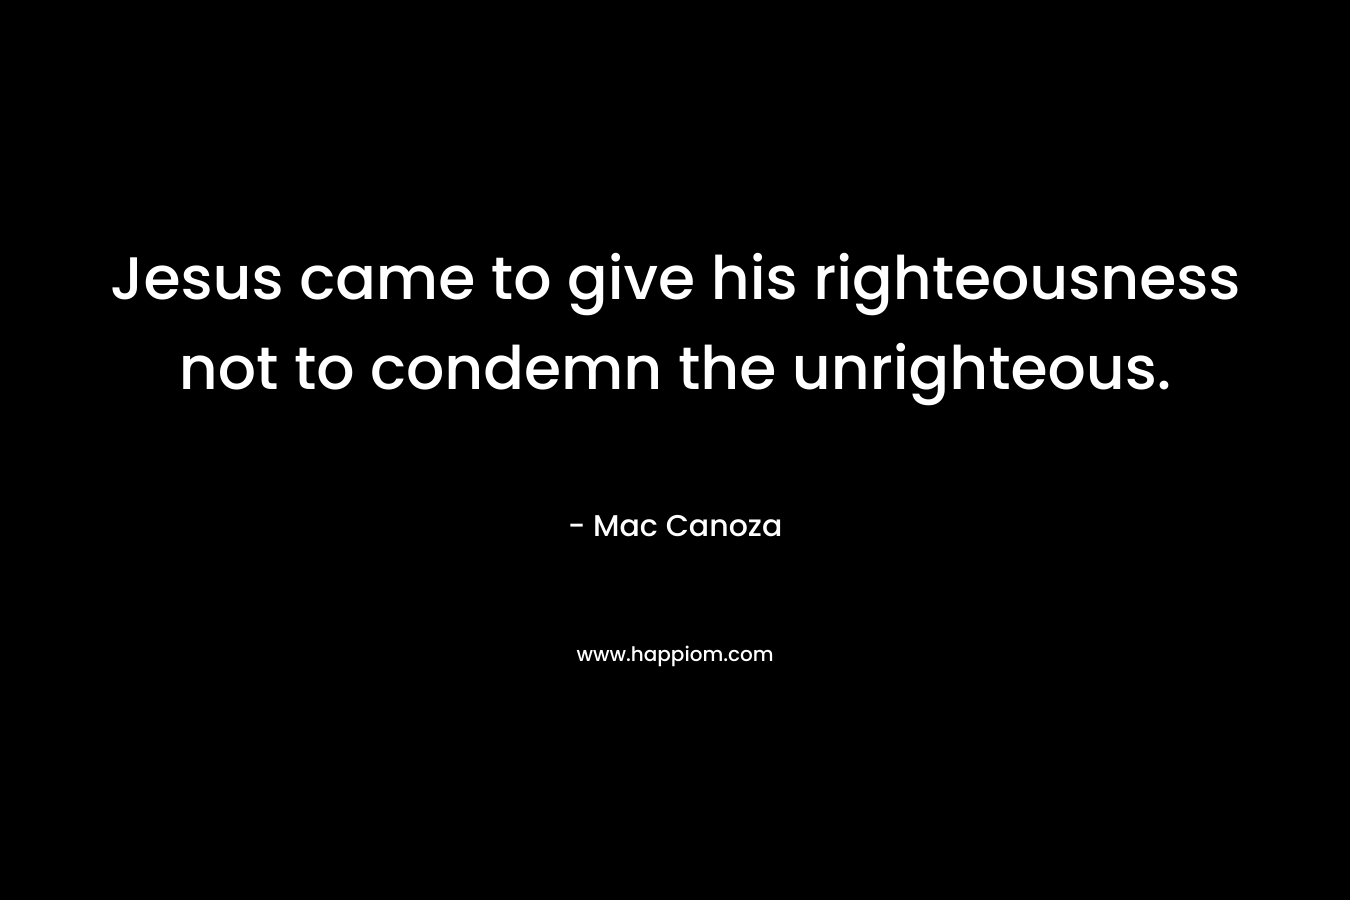 Jesus came to give his righteousness not to condemn the unrighteous. – Mac Canoza